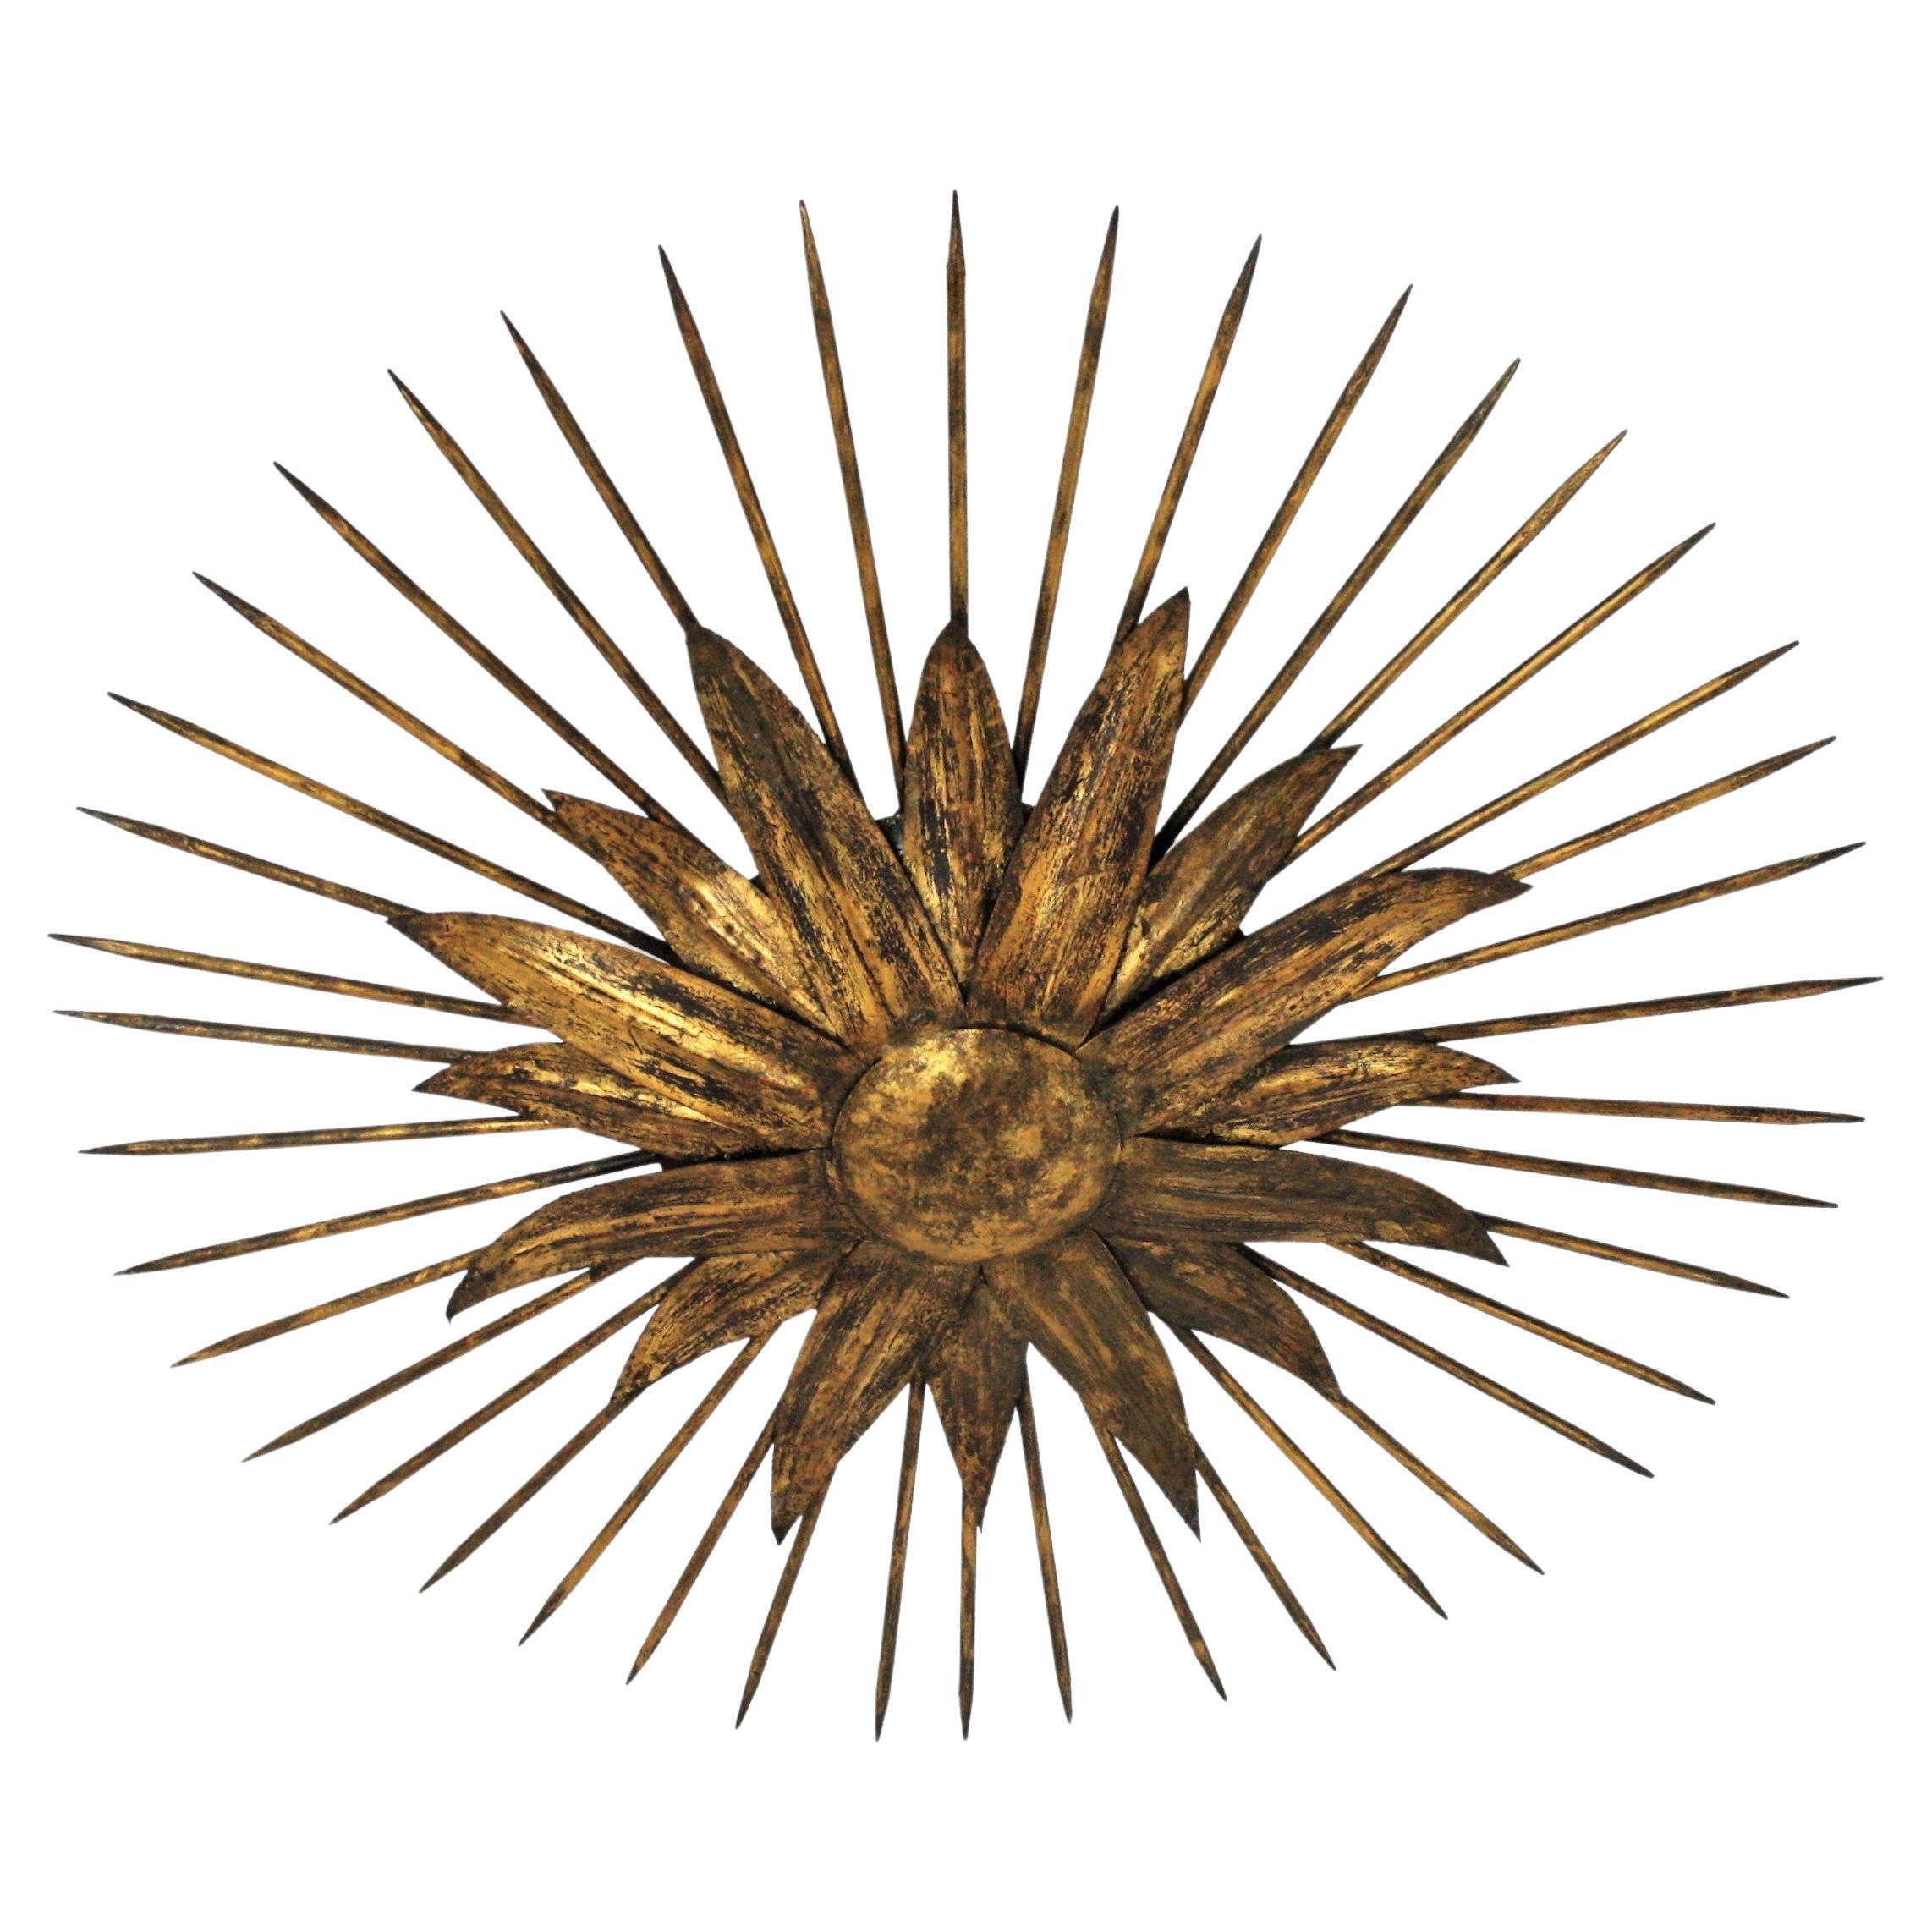 French modern neoclassical spikey sunburst flush mount / wall light in gilt iron with nail rays. France, 1940s.
Outstanding hand-hammered gold leaf gilt iron leafed sunburst light fixture from the late Art Deco period.
Highly decorative design with